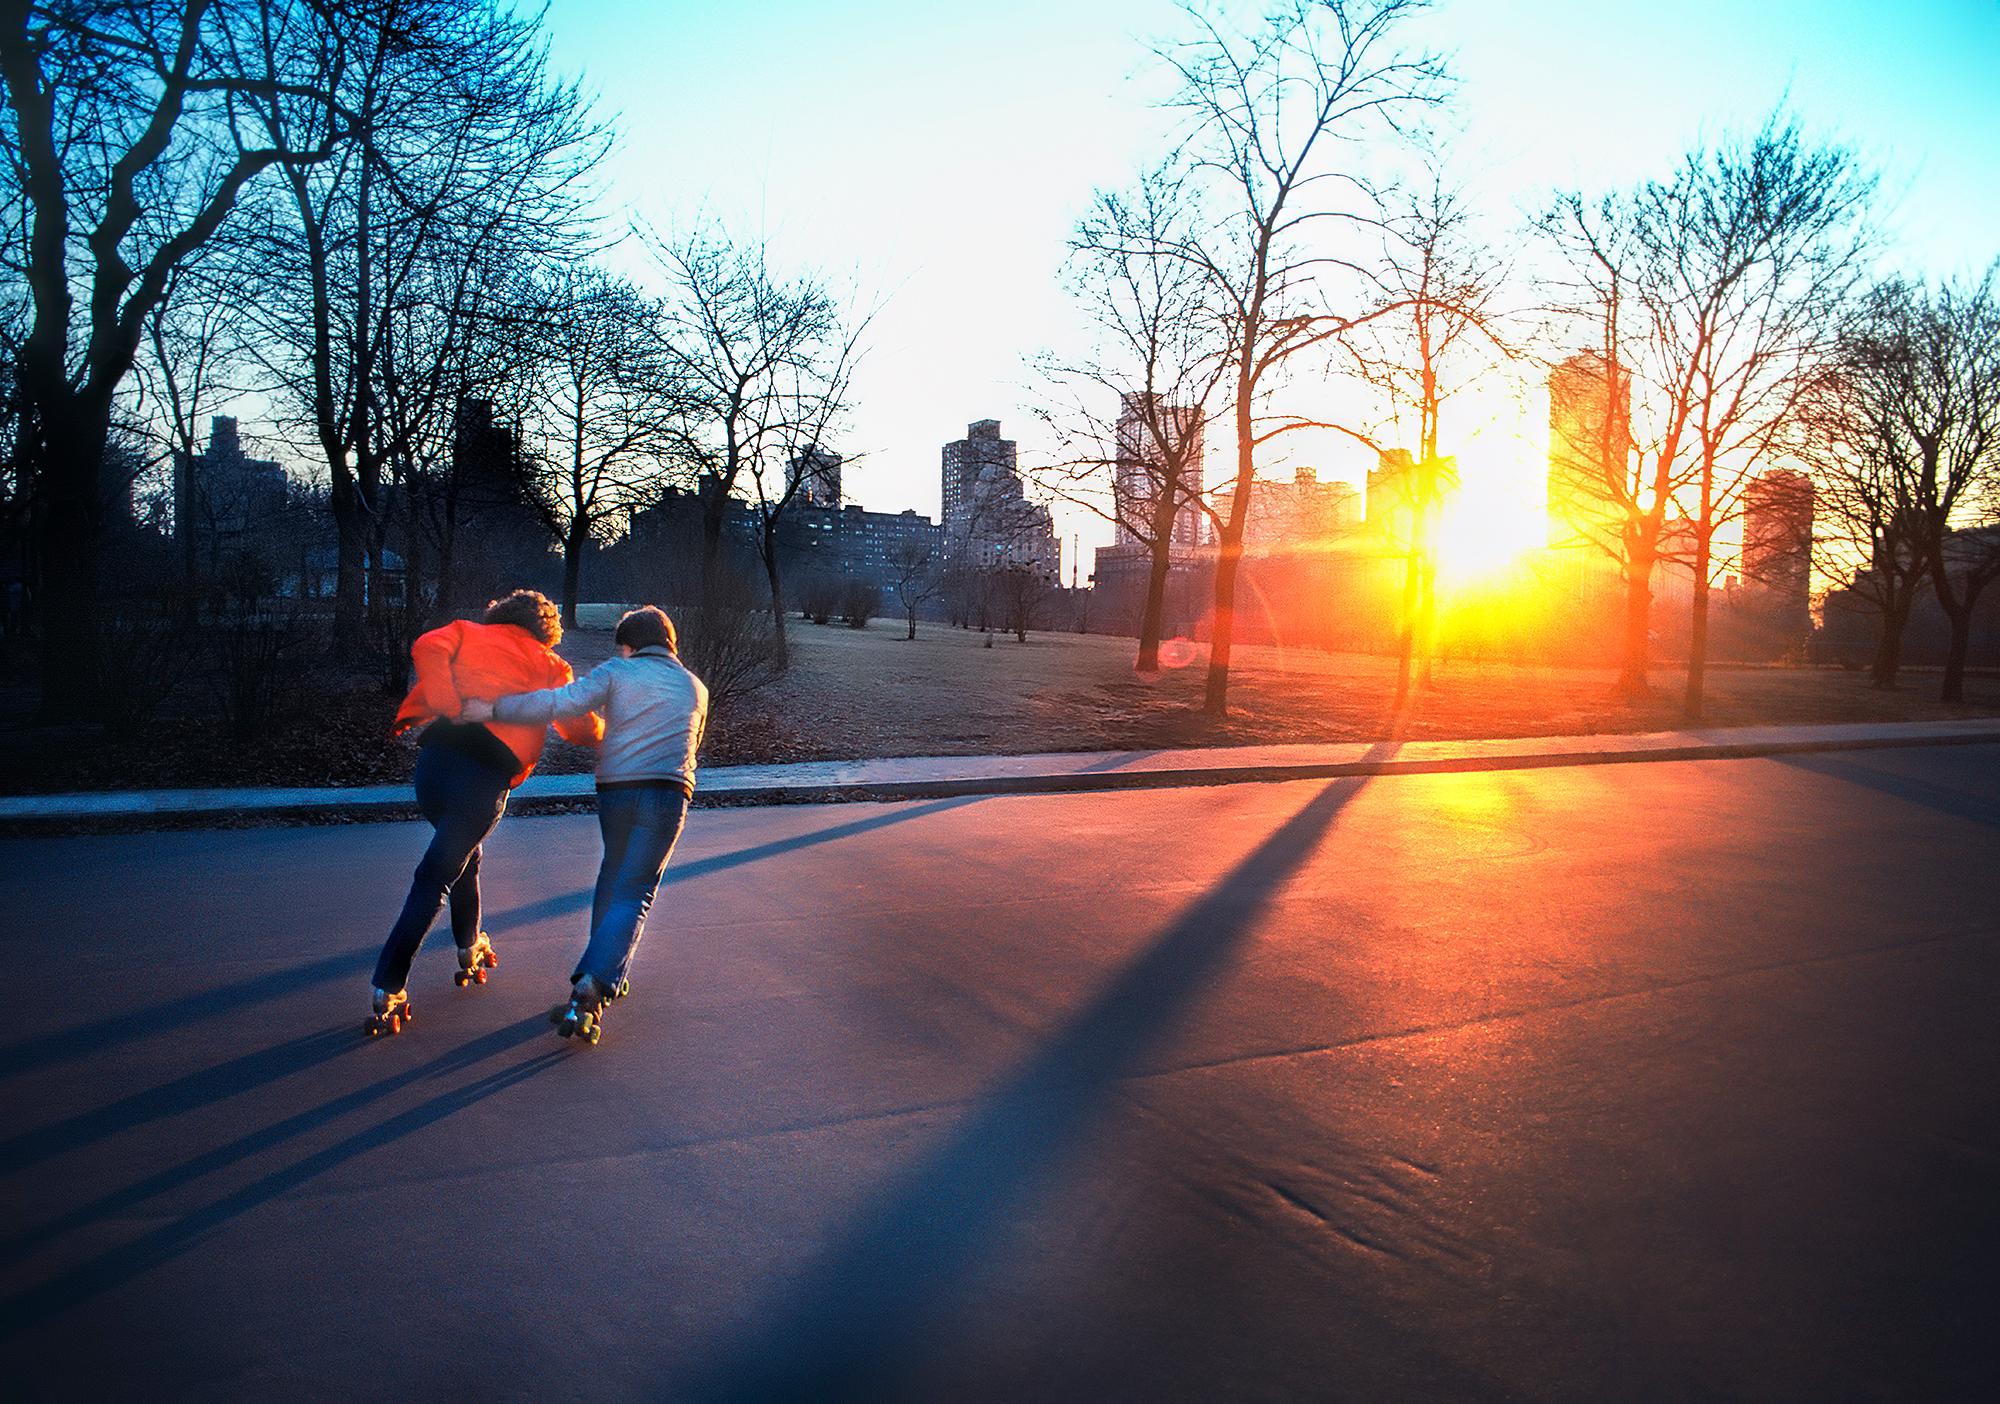 Mitchell Funk Figurative Photograph - Skaters in Central Park at Sunset